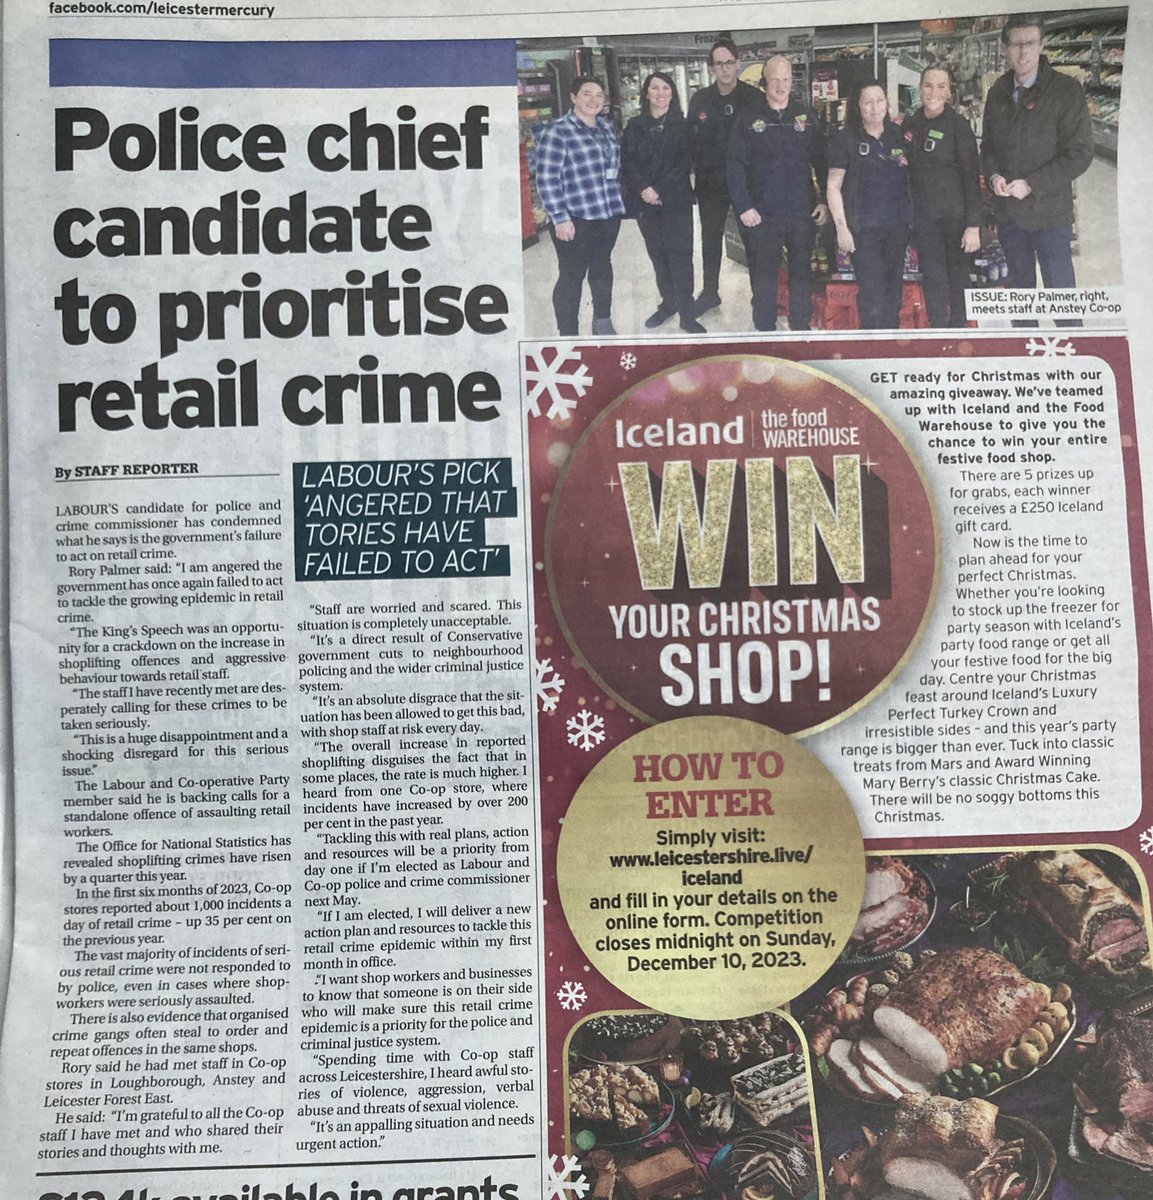 I’ve supported @UsdawUnion’s #FreedomFromFear campaign for many years. 
Sadly, abuse and violence towards shop workers is increasing: I spent time recently to hear directly from Co-op staff in Leicestershire. 
▪️We need strengthened neighbourhood policing and a specific offence👇